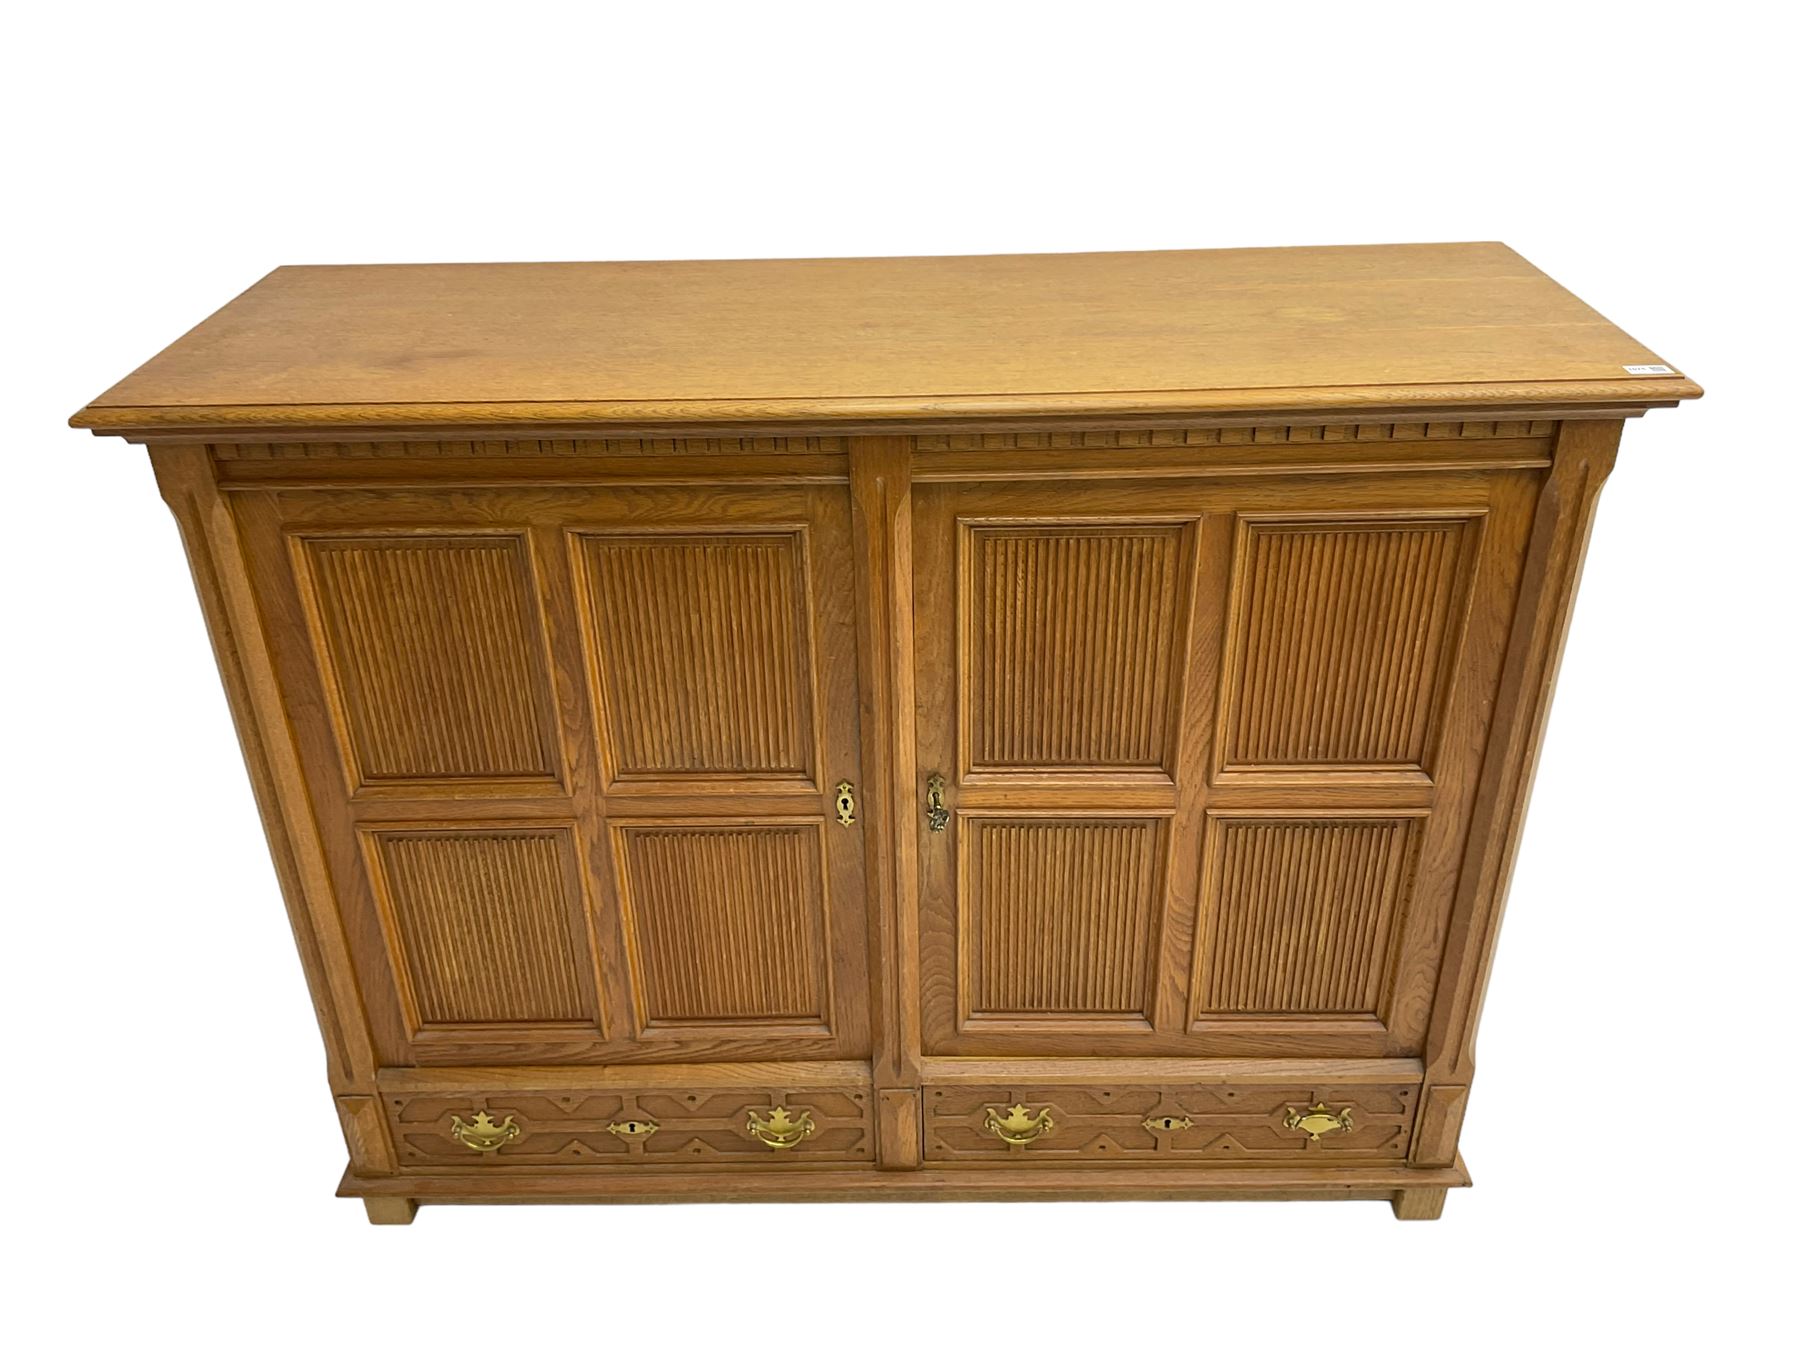 Continental 20th century carved oak cabinet - Image 2 of 6